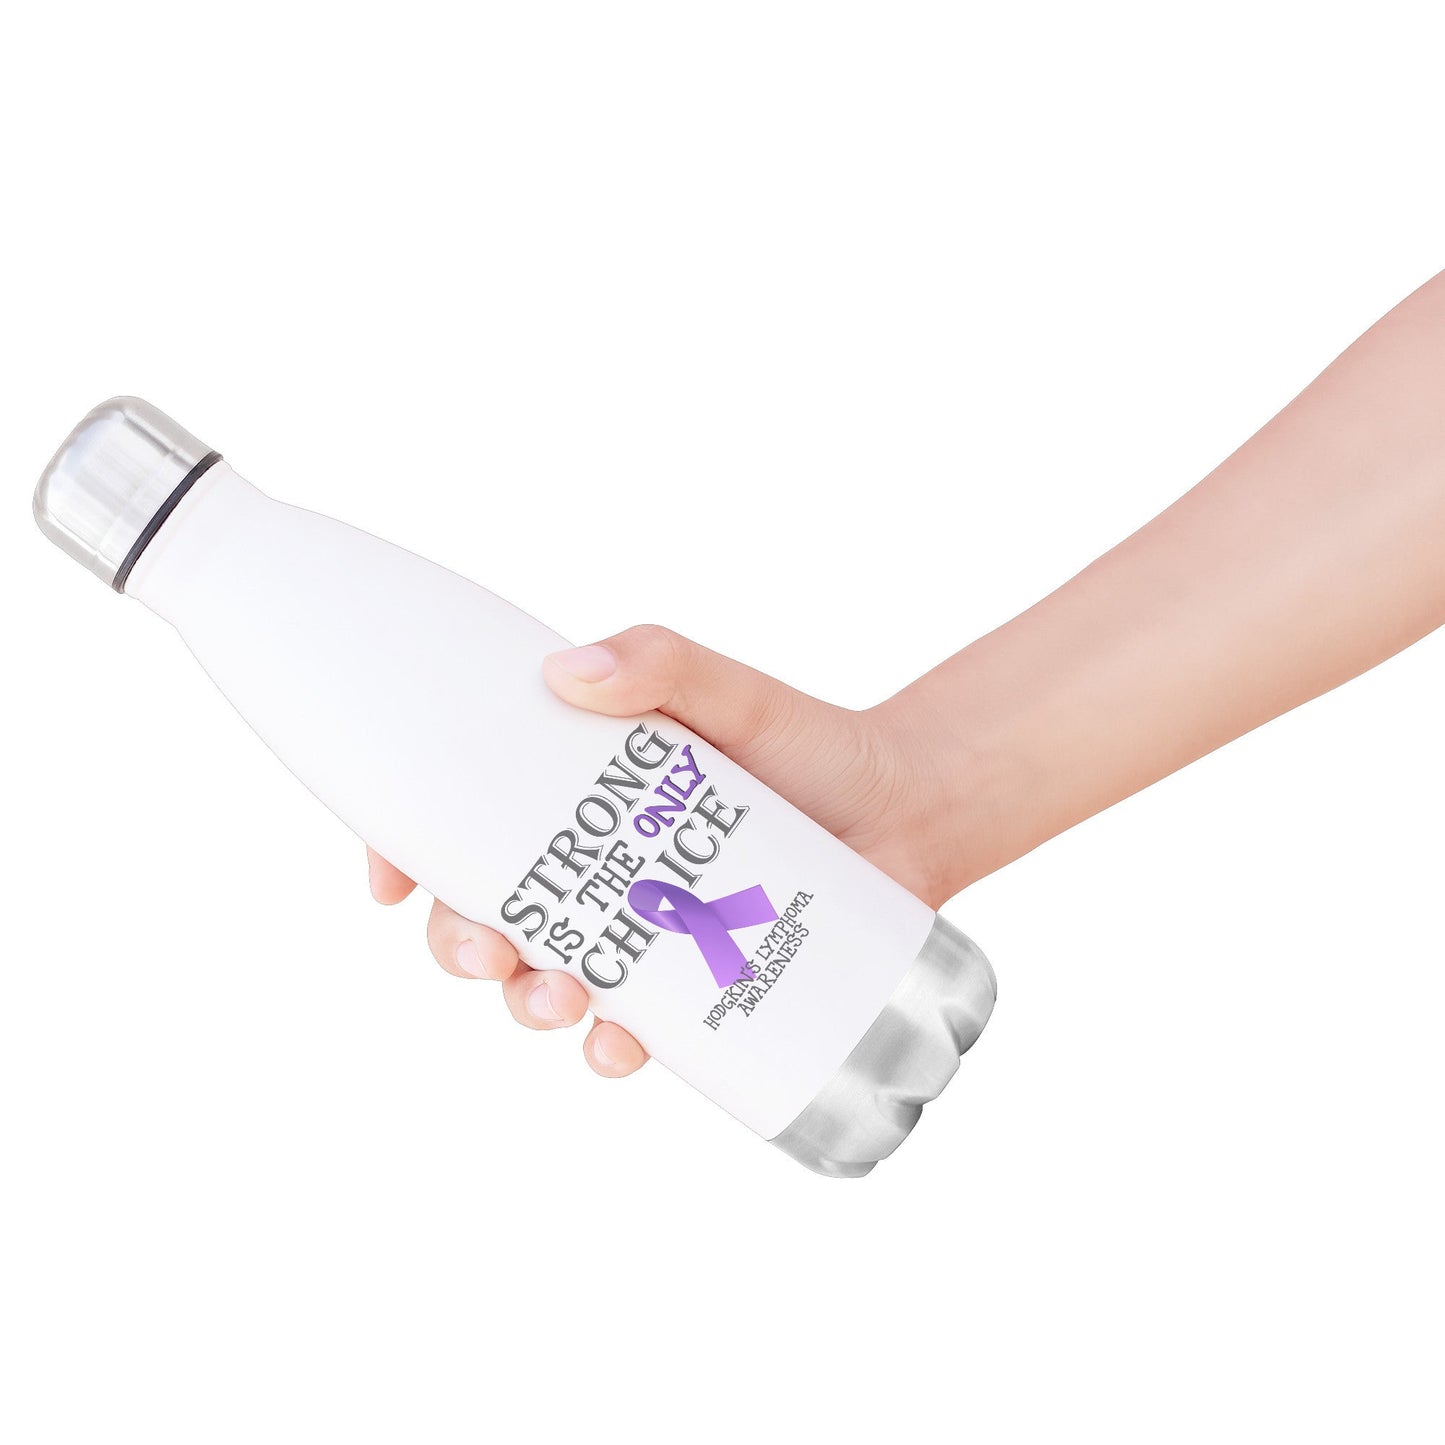 Strong is the Only Choice -Hodgkin's Lymphoma Awareness 20oz Insulated Water Bottle |x|